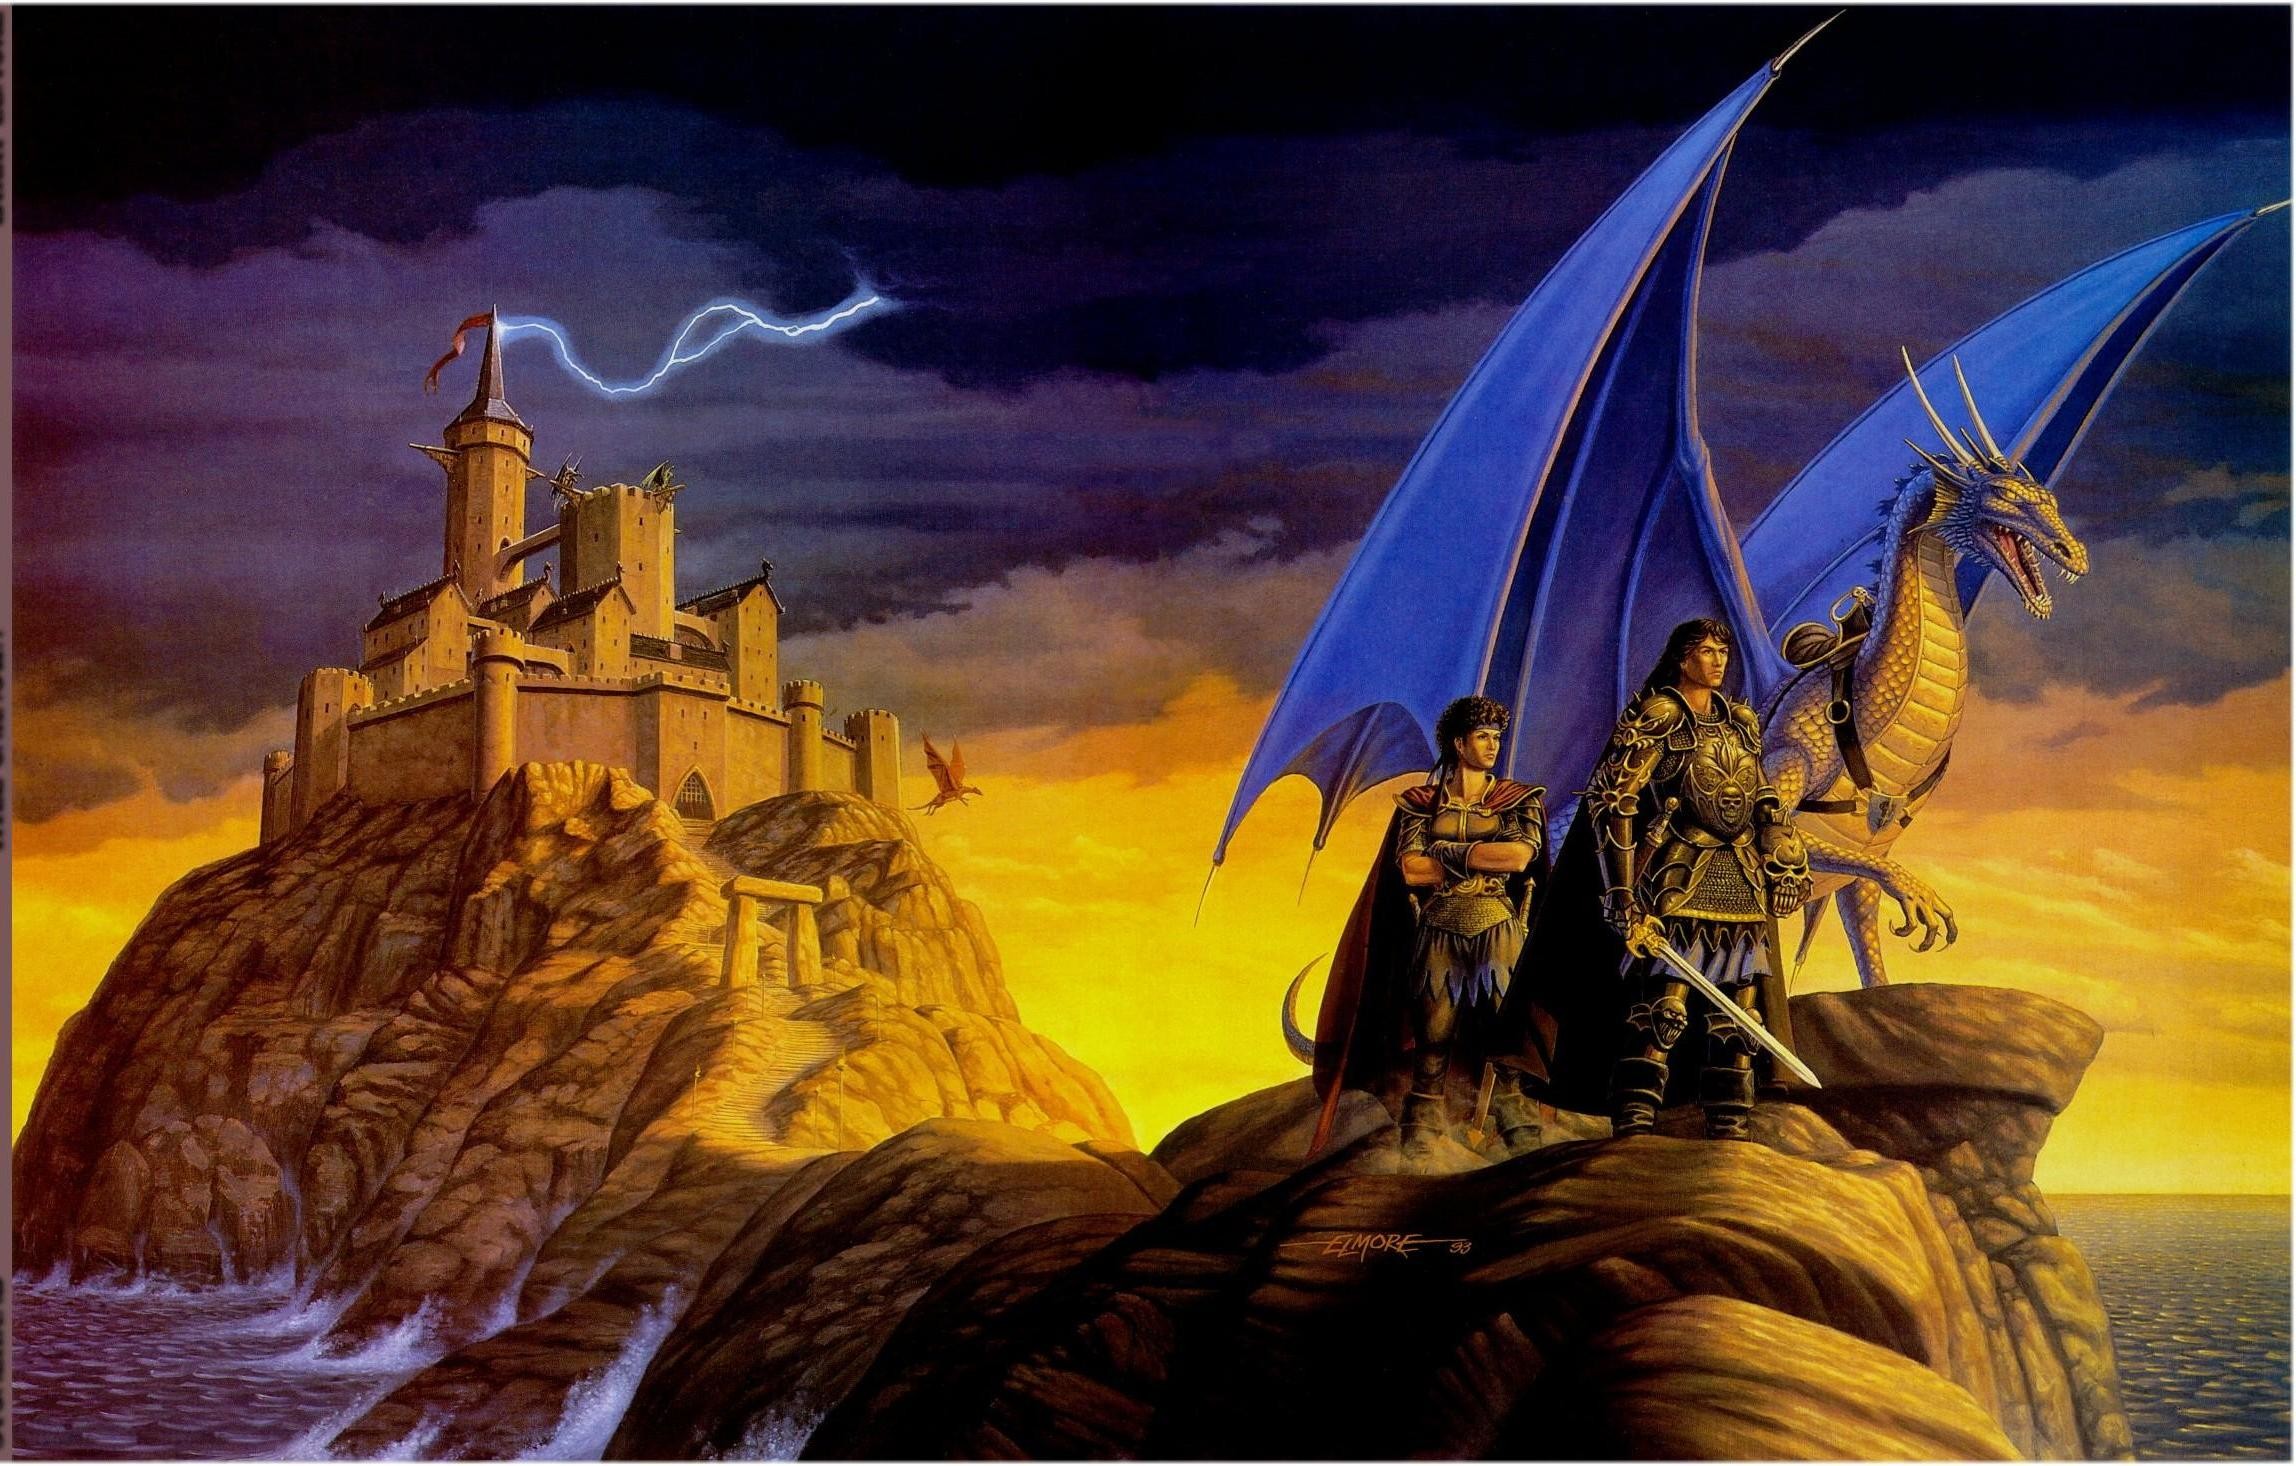 2296x1466 Dragonlance, The Second Generation by Larry Elmore.